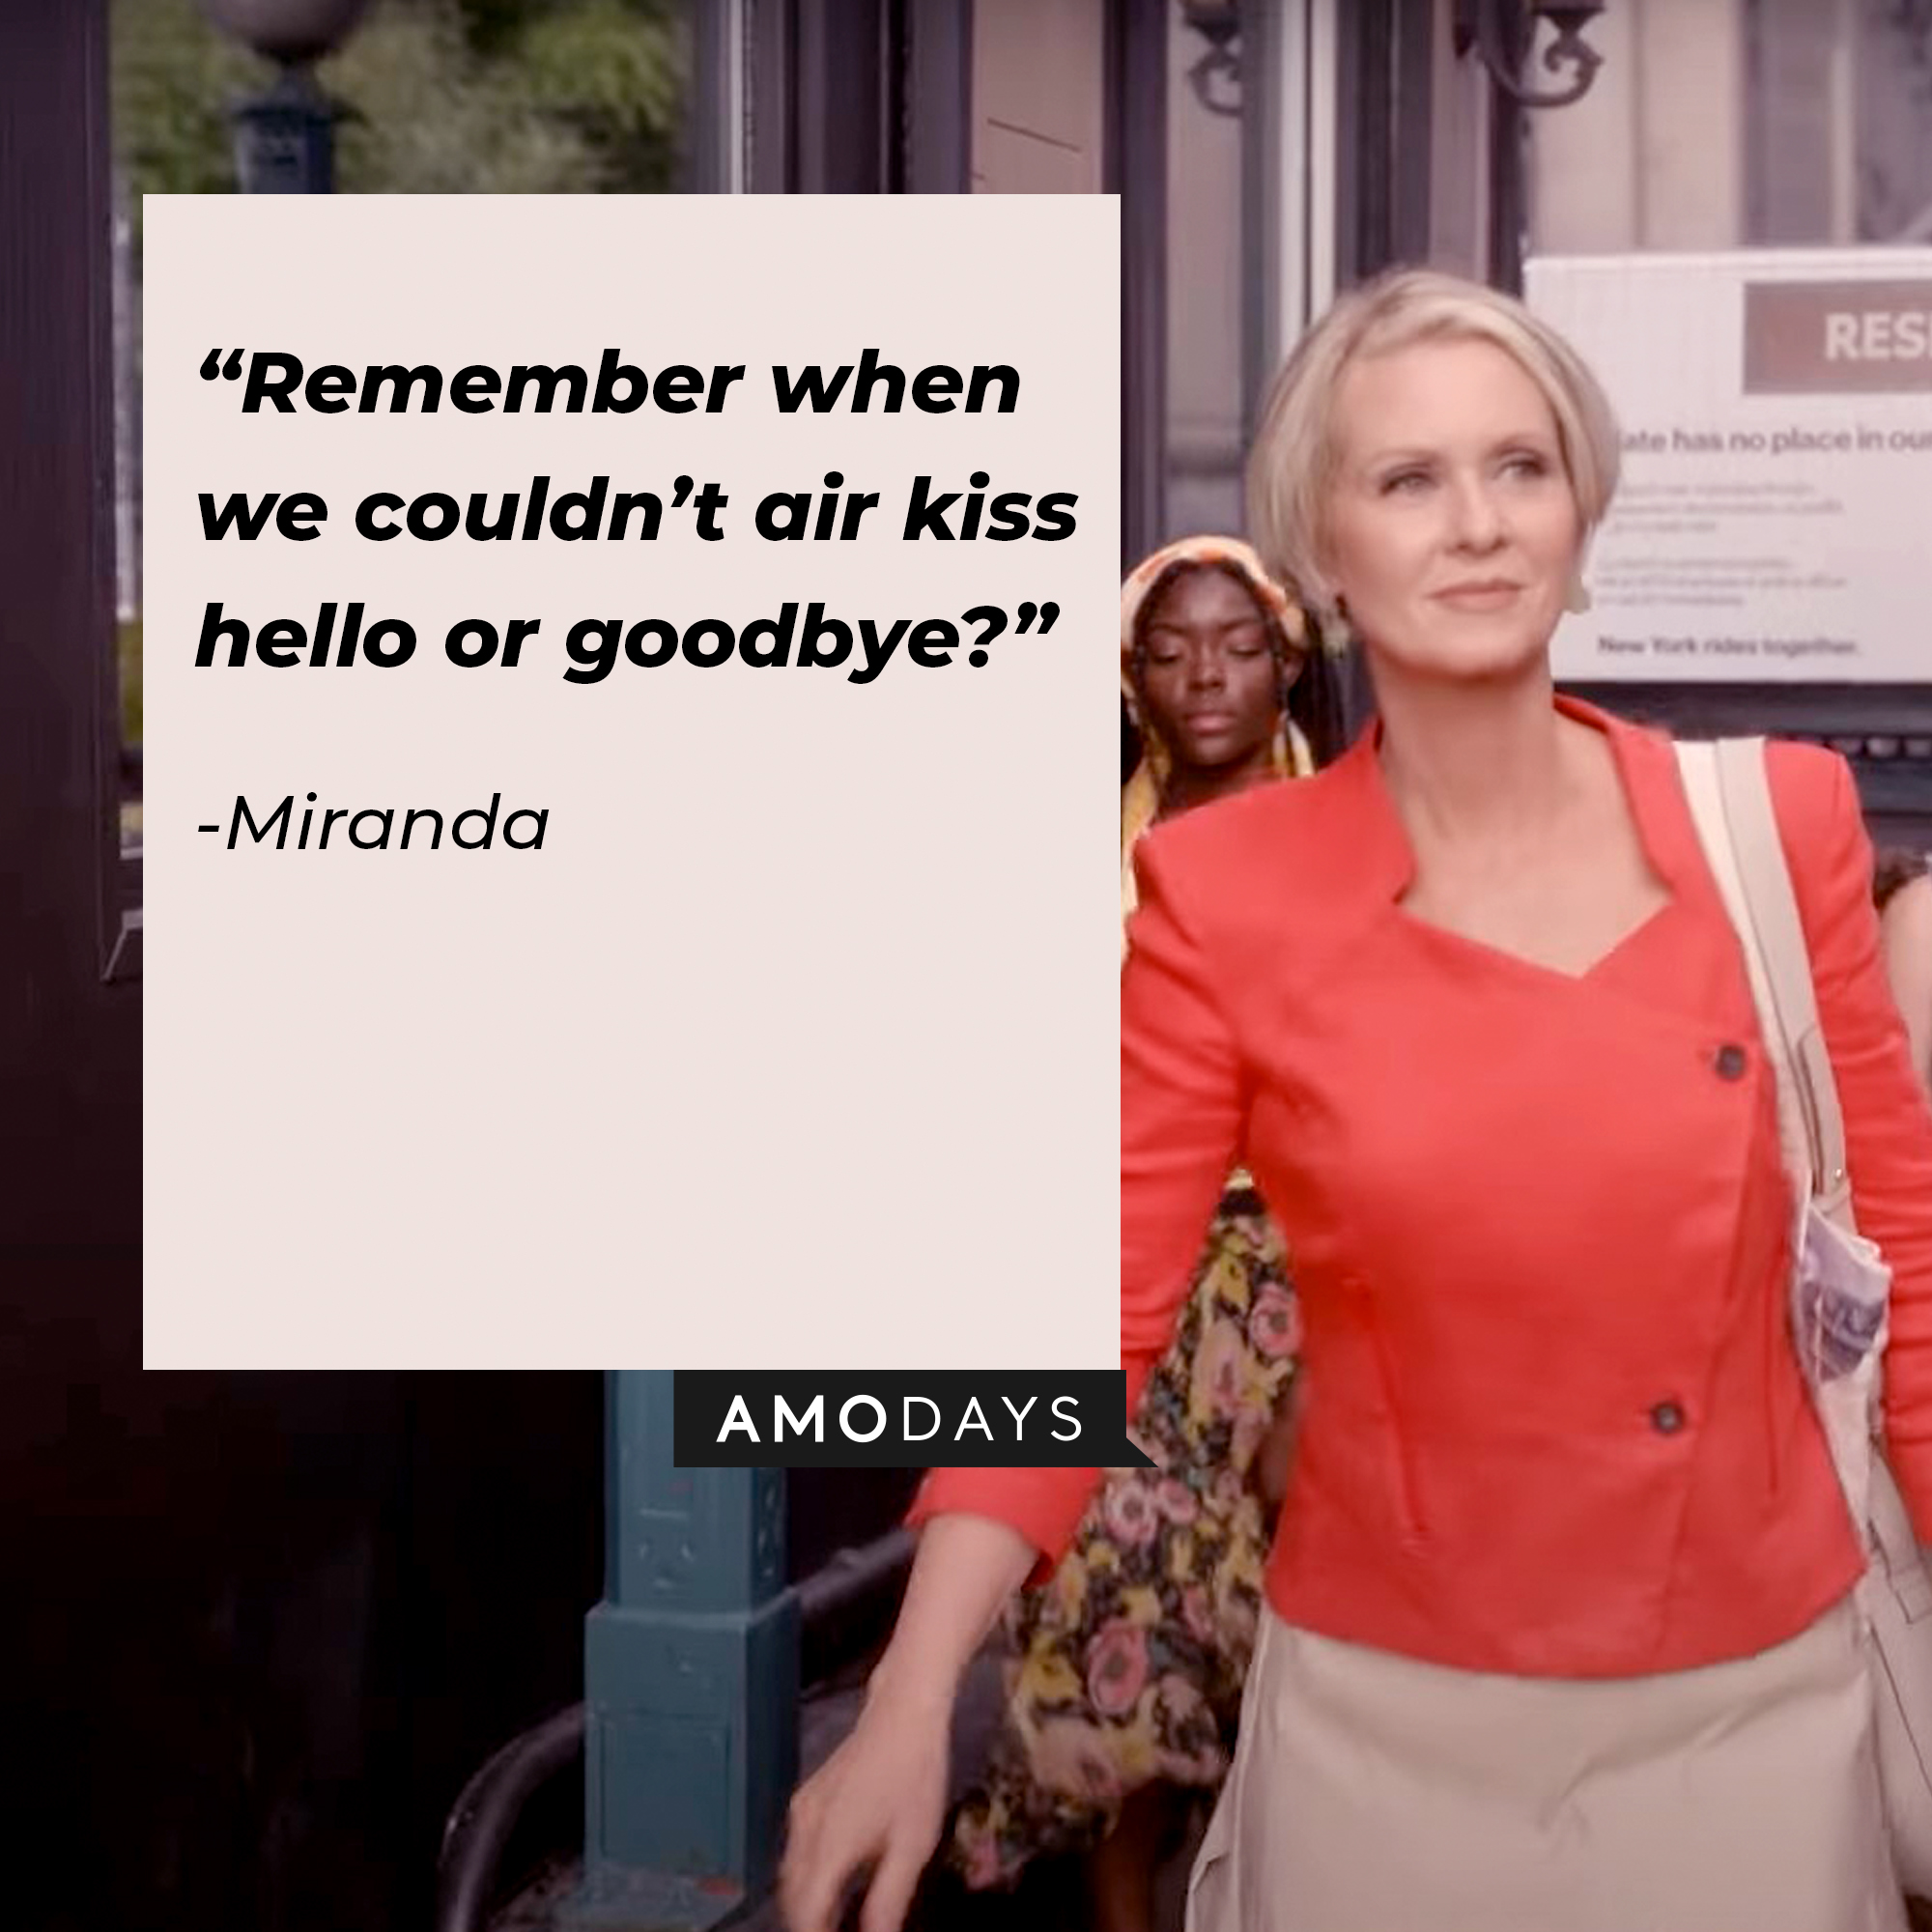 An image of Miranda with her quote: "Remember when we couldn't air kiss hello or goodbye?" |  facebook.com/justlikethatmax